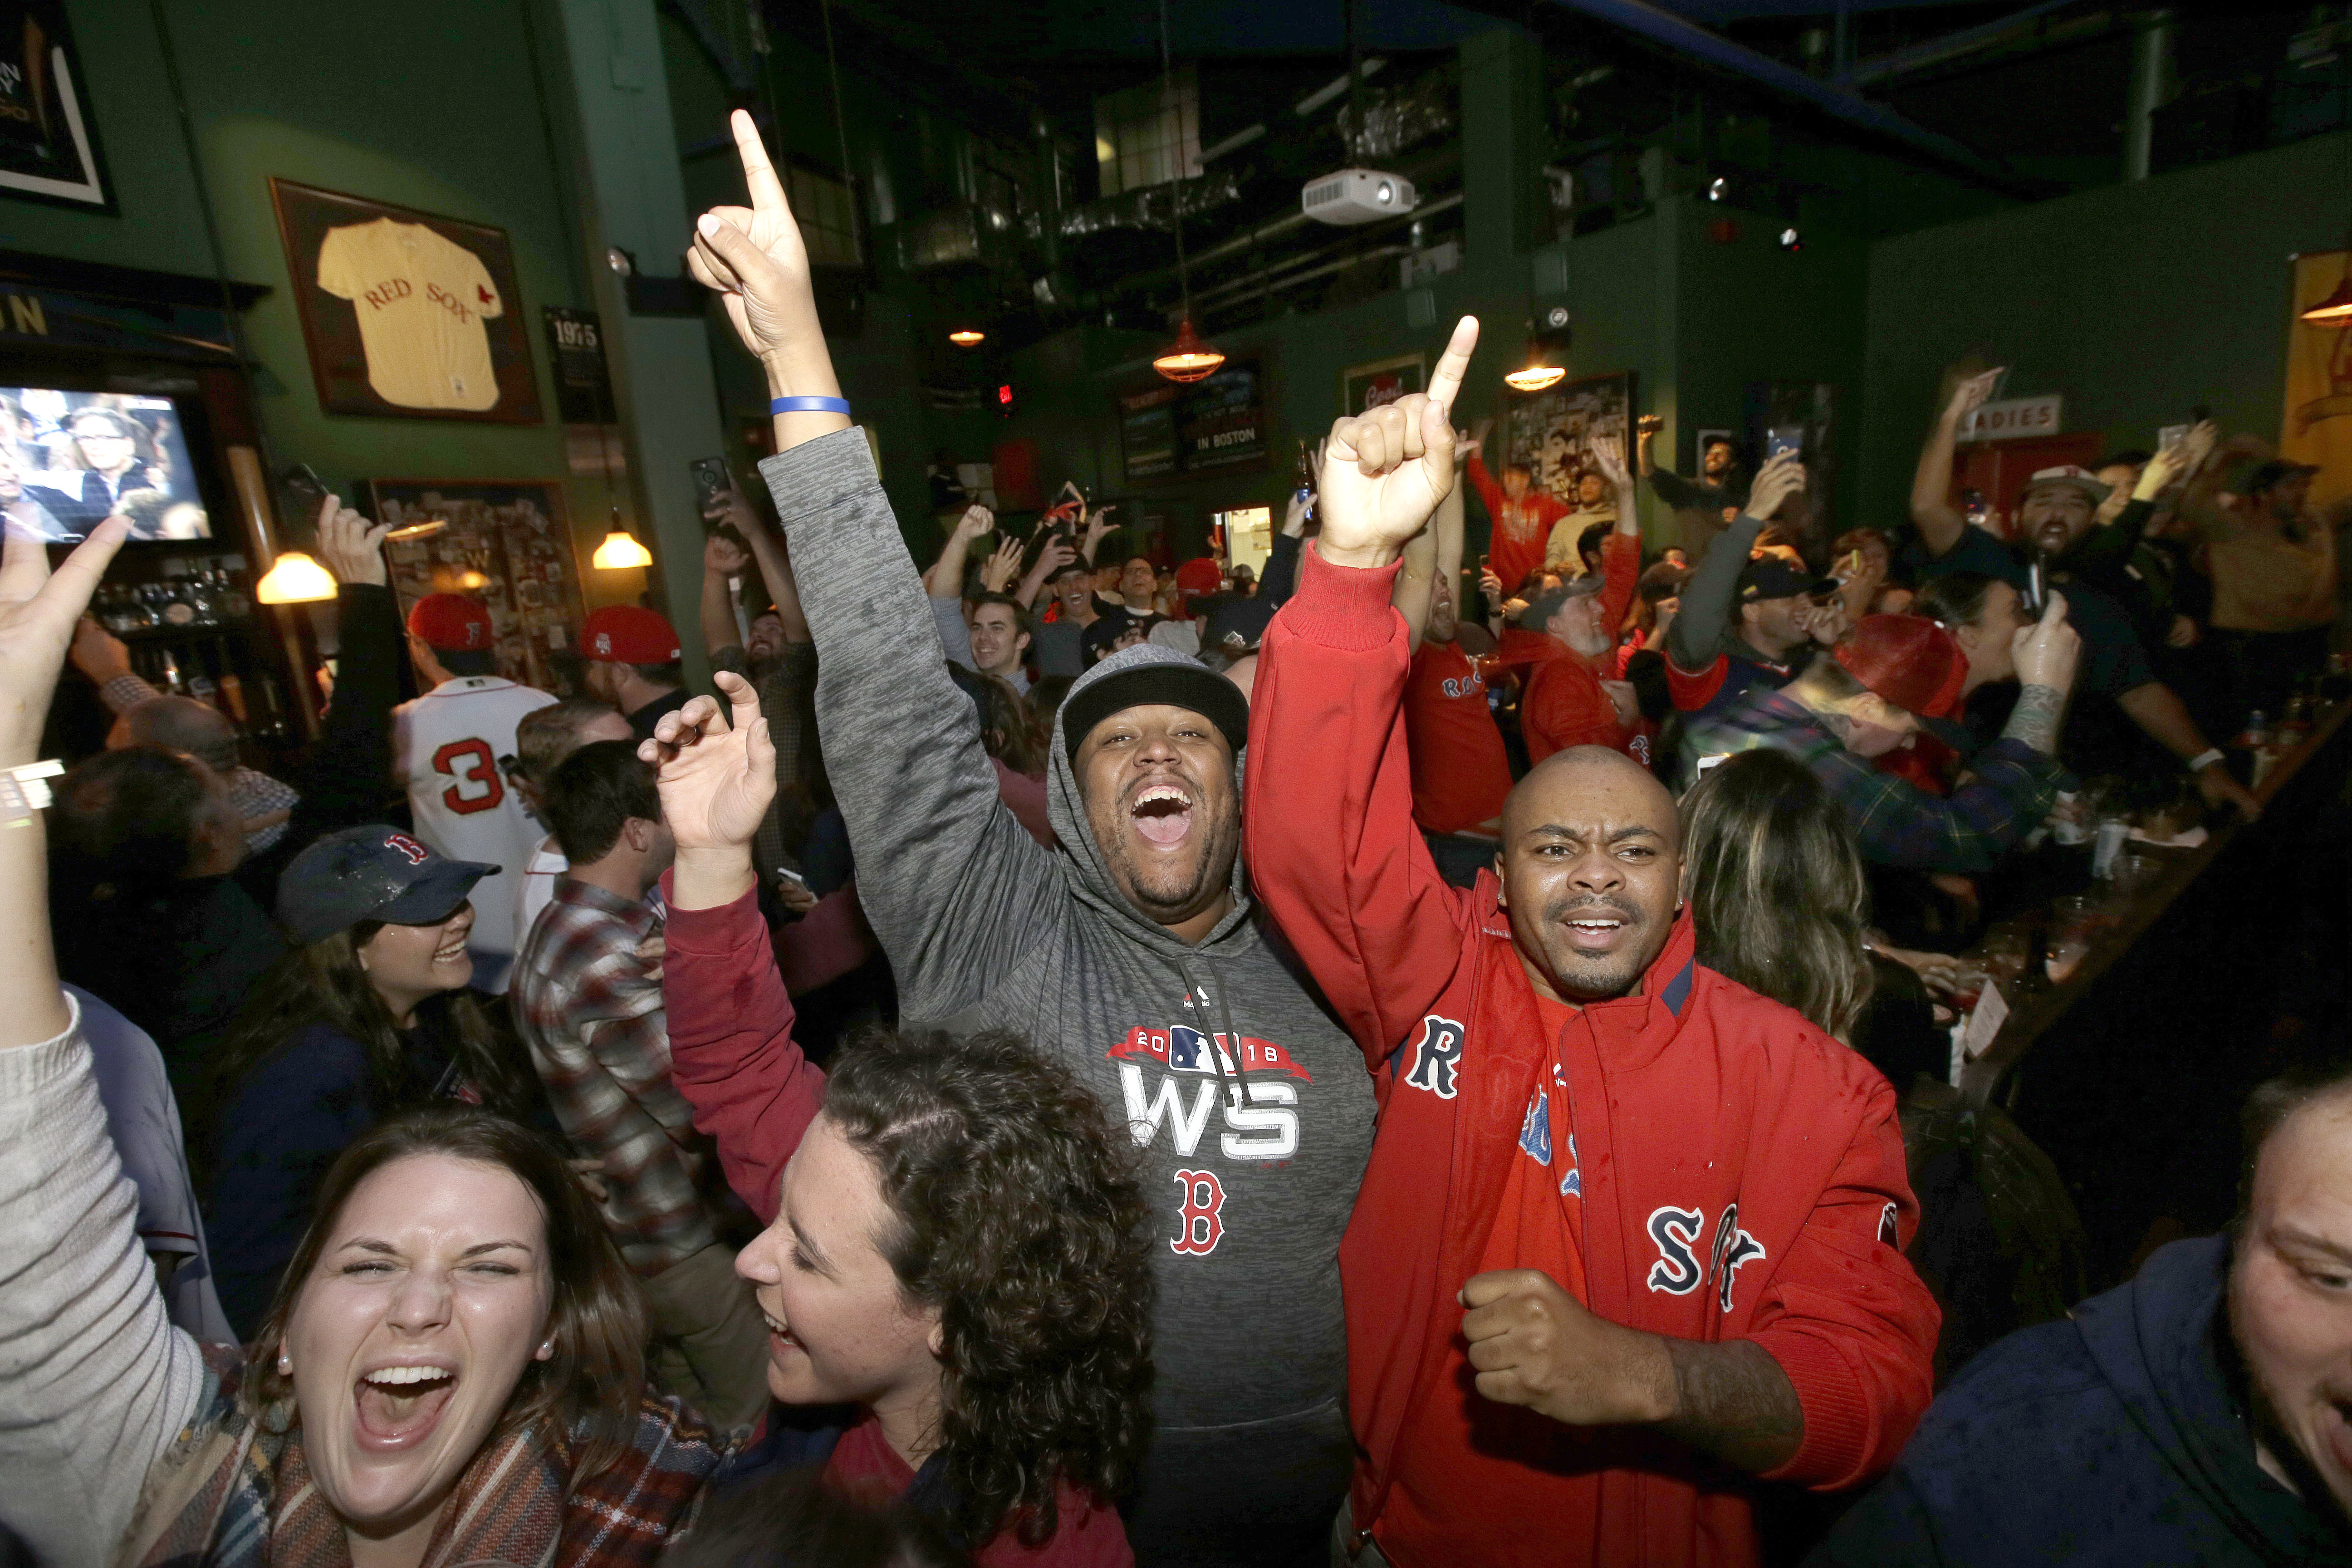 Red Sox fans celebrate latest title; parade to follow